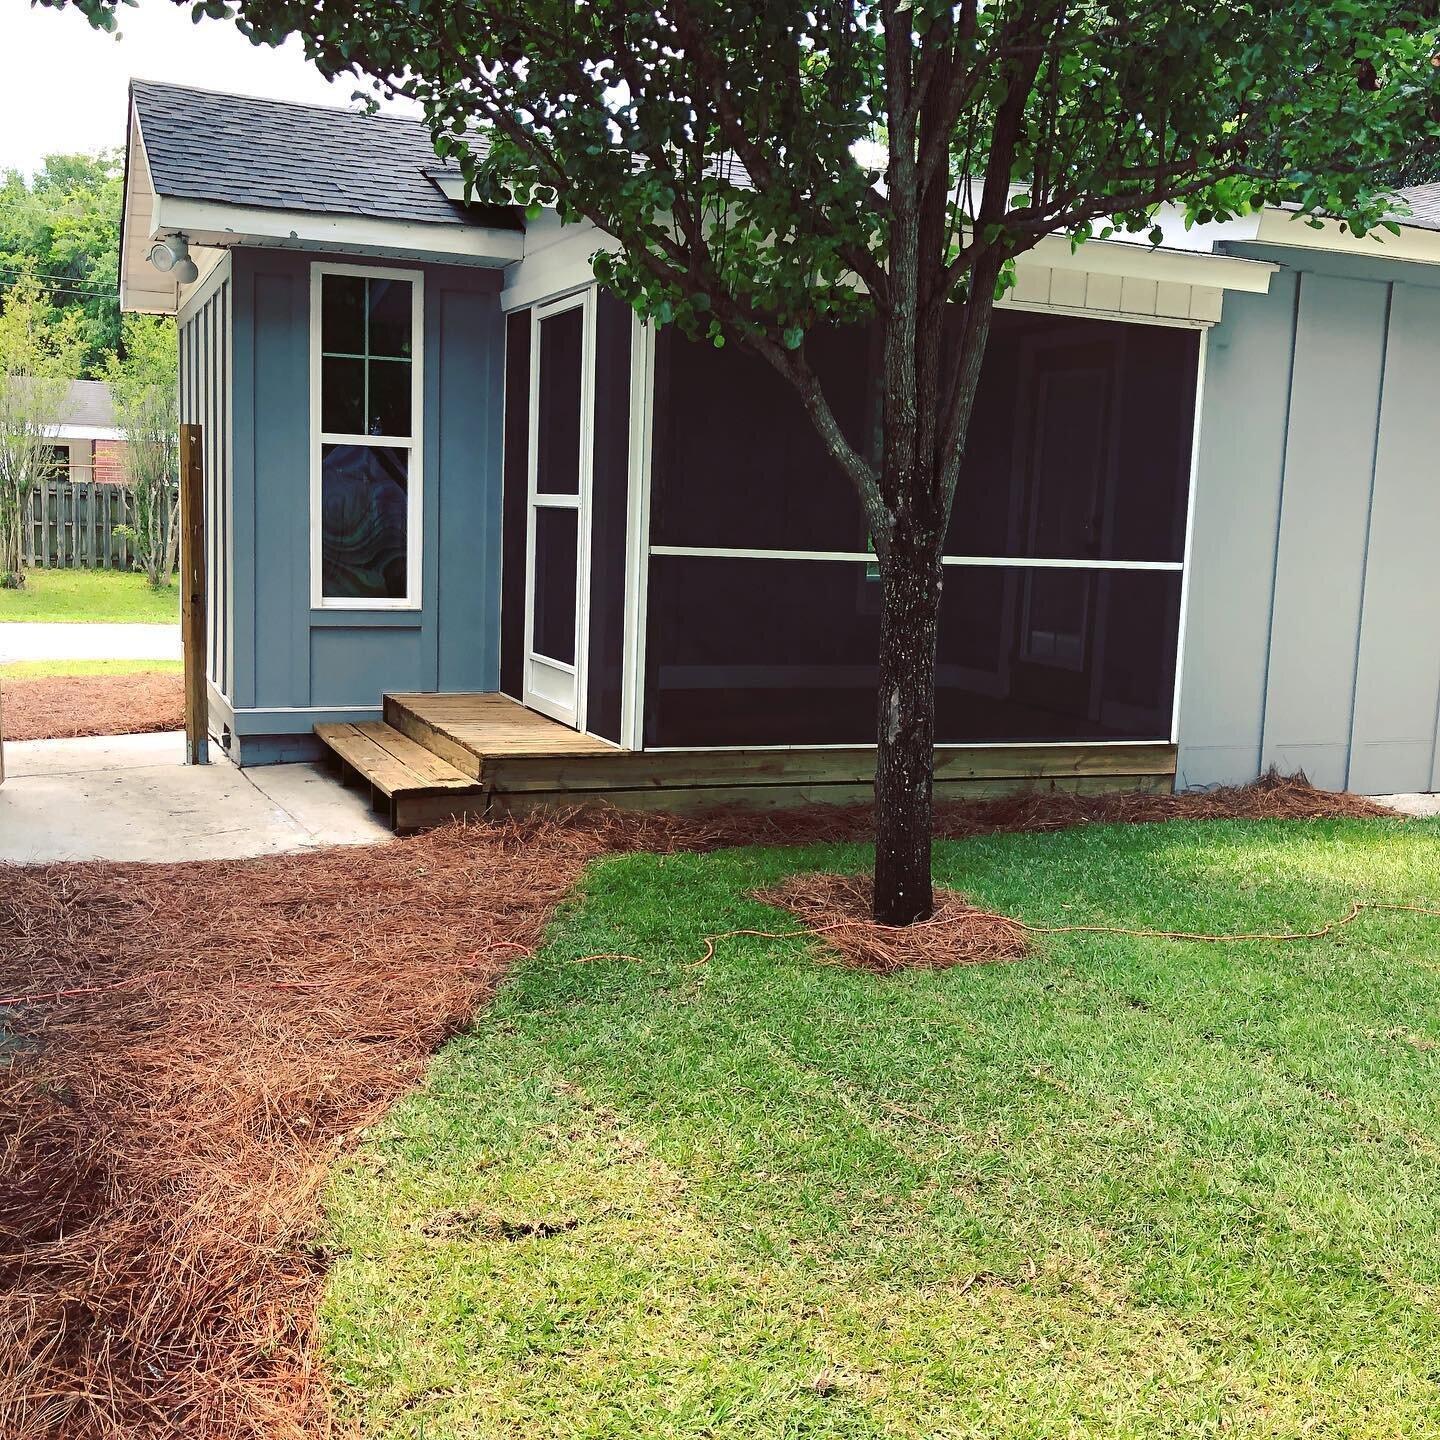 @falconbridgepropertyservice did an amazing job transforming the bland, boring, and dry back yard of our #parkcircle project into a lush oasis! It&rsquo;s such an inviting space now. Swipe to the end for before pics. #charleston
#charlestonrealestate